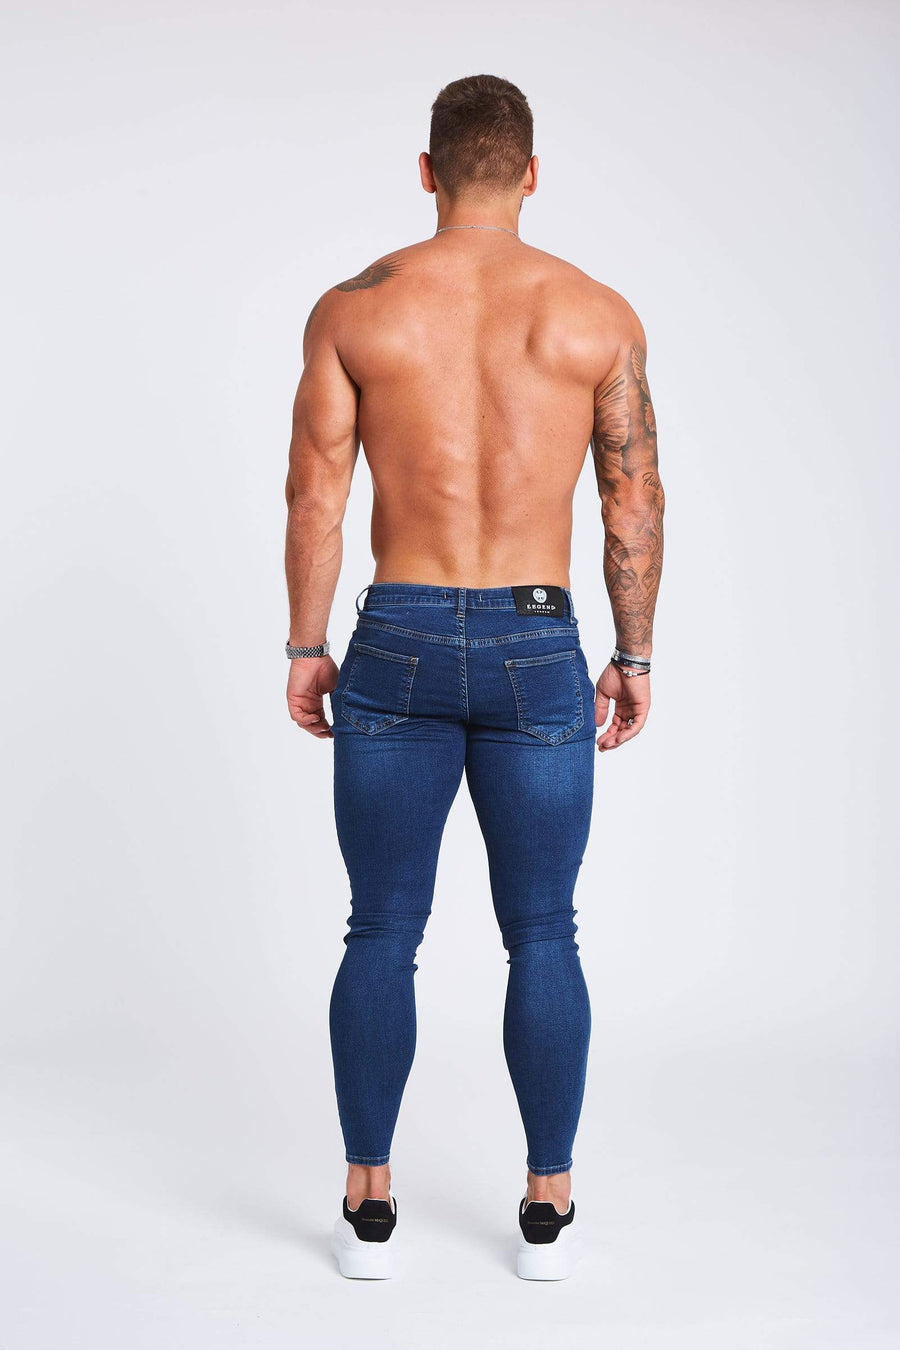 Legend London Jeans Dark Blue Jeans - Ripped & Repaired